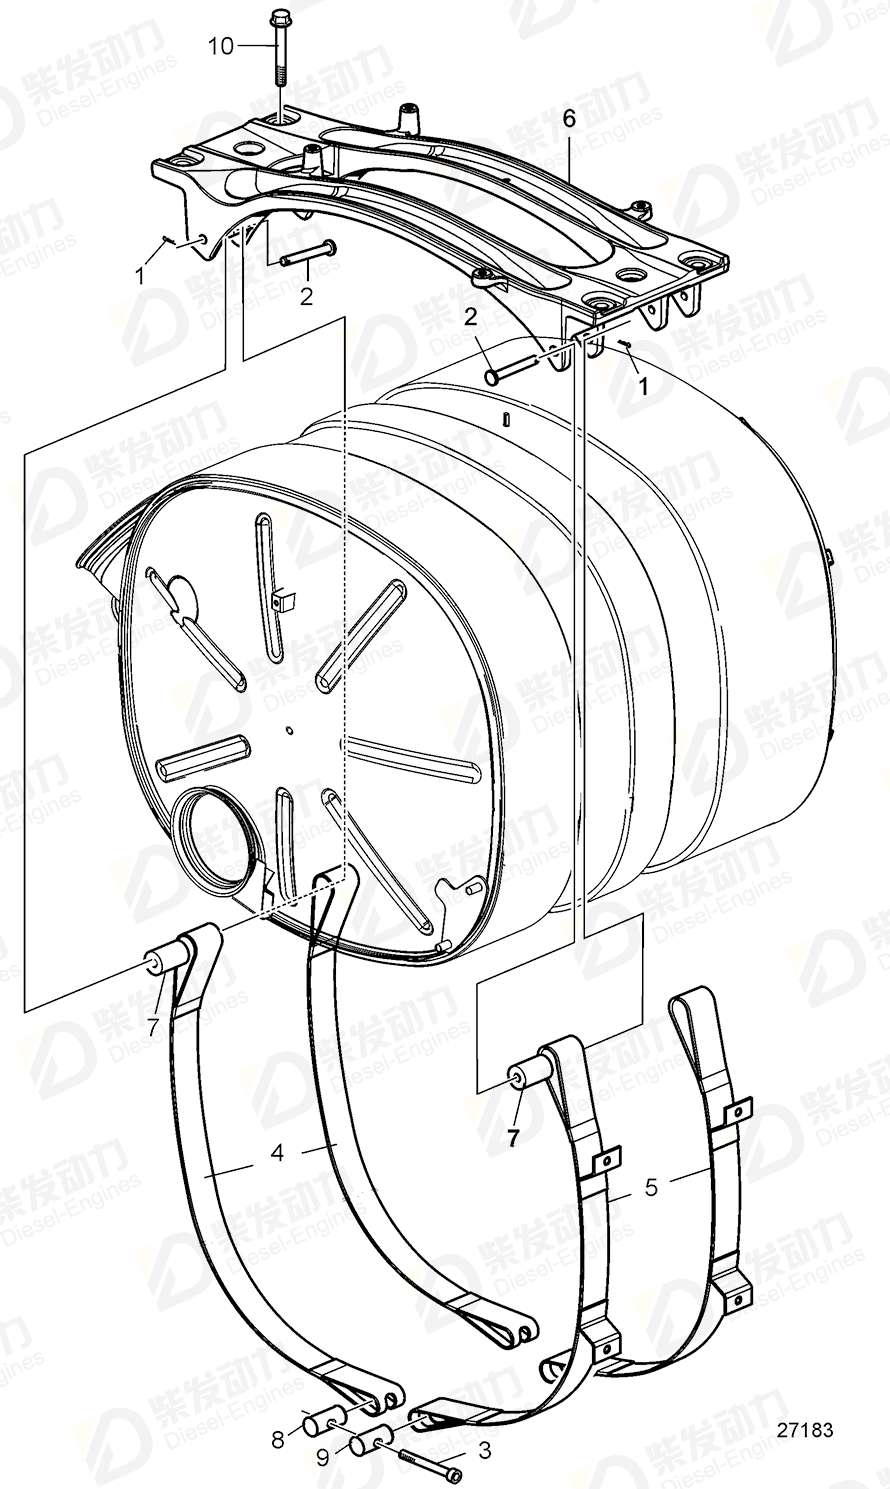 VOLVO Clevis pin 964867 Drawing